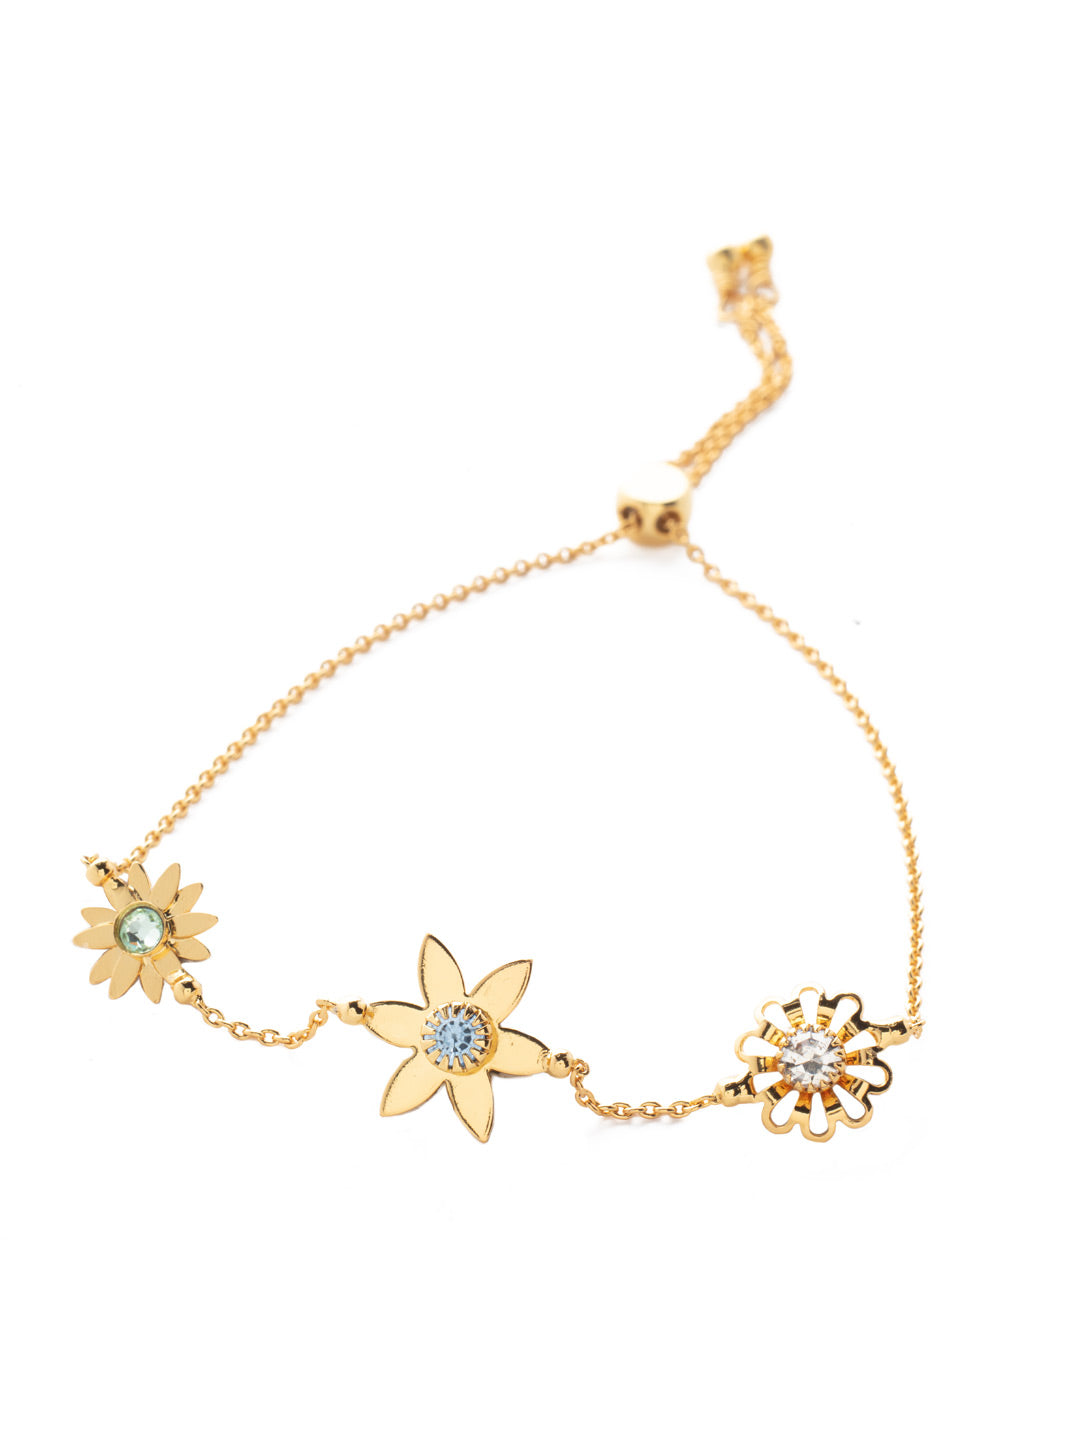 Normani Slider Bracelet - BEV1BGSPR - <p>The Normani Slider Bracelet celebrates spring with floral charm accents and crystals that shine bright. Slide it on and fit to size. From Sorrelli's Spring Rain collection in our Bright Gold-tone finish.</p>